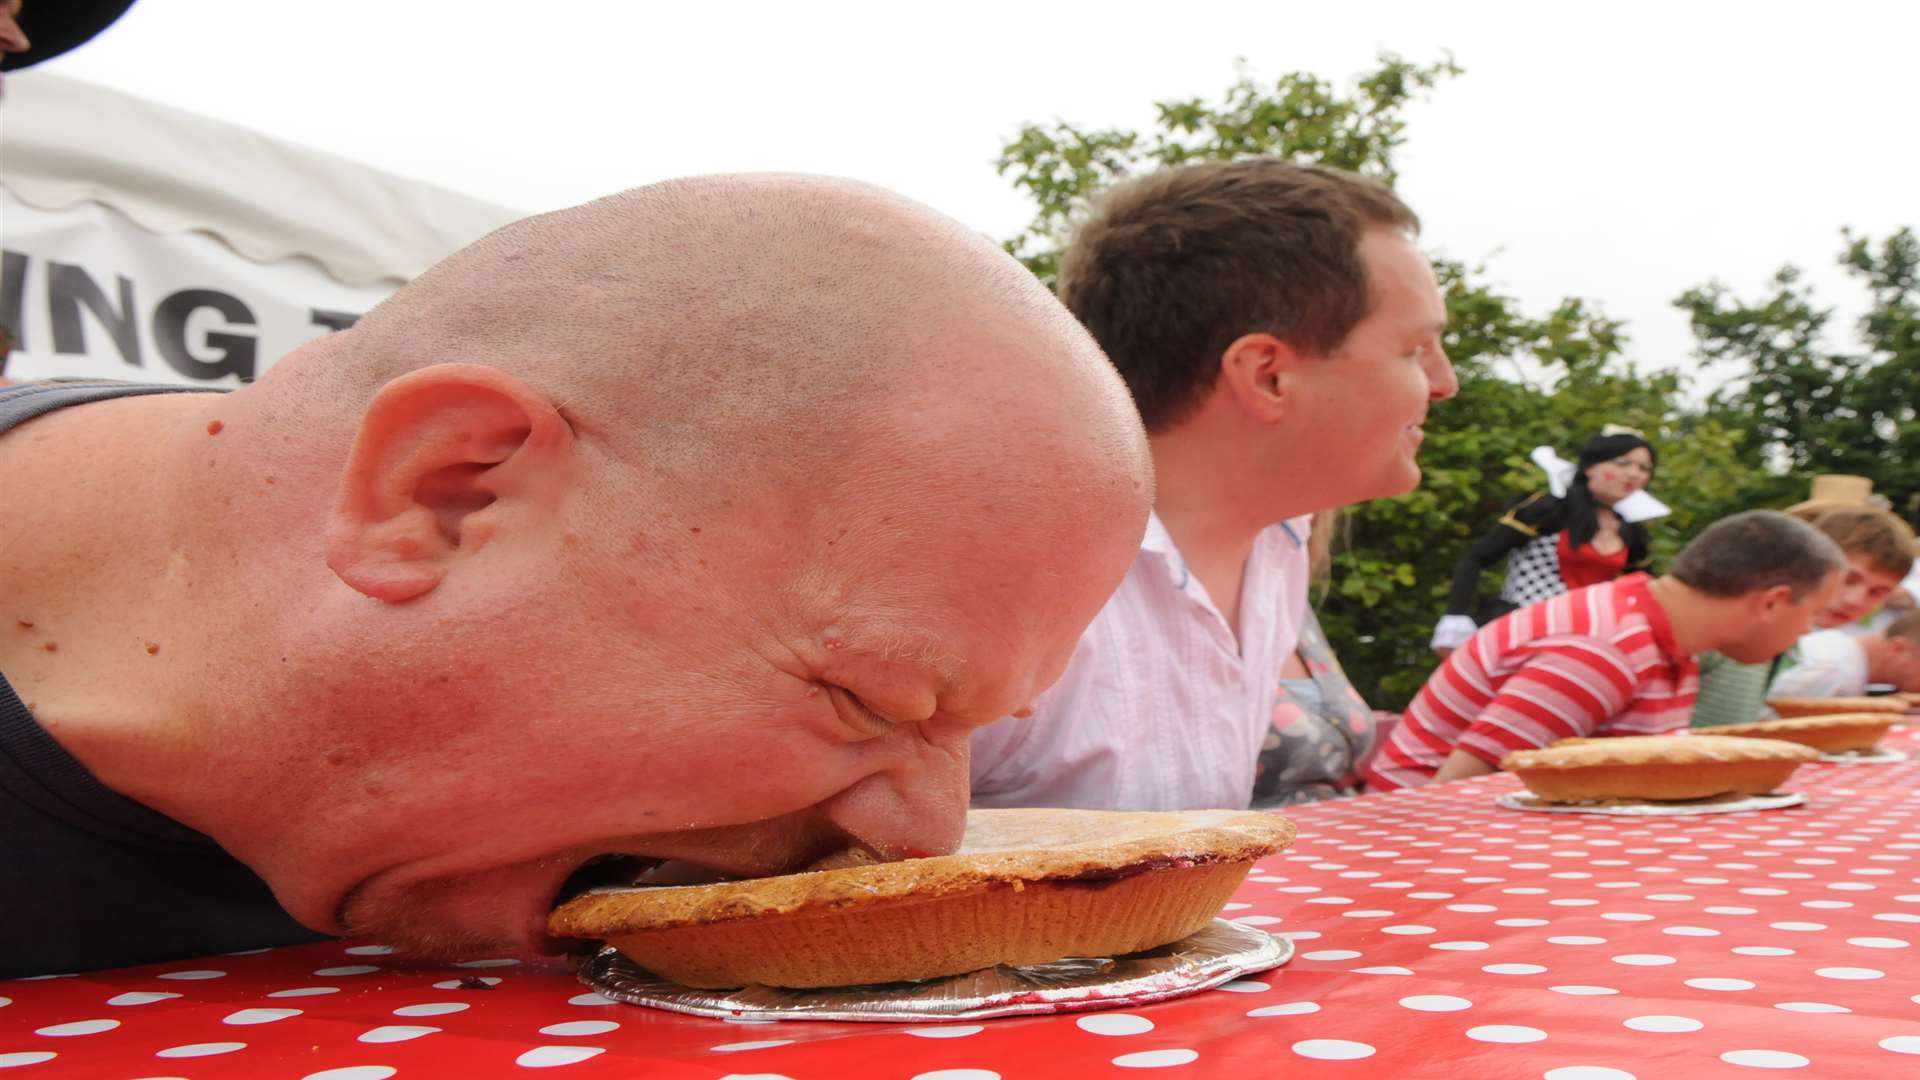 Get stuck in at the cherry pie eating contest